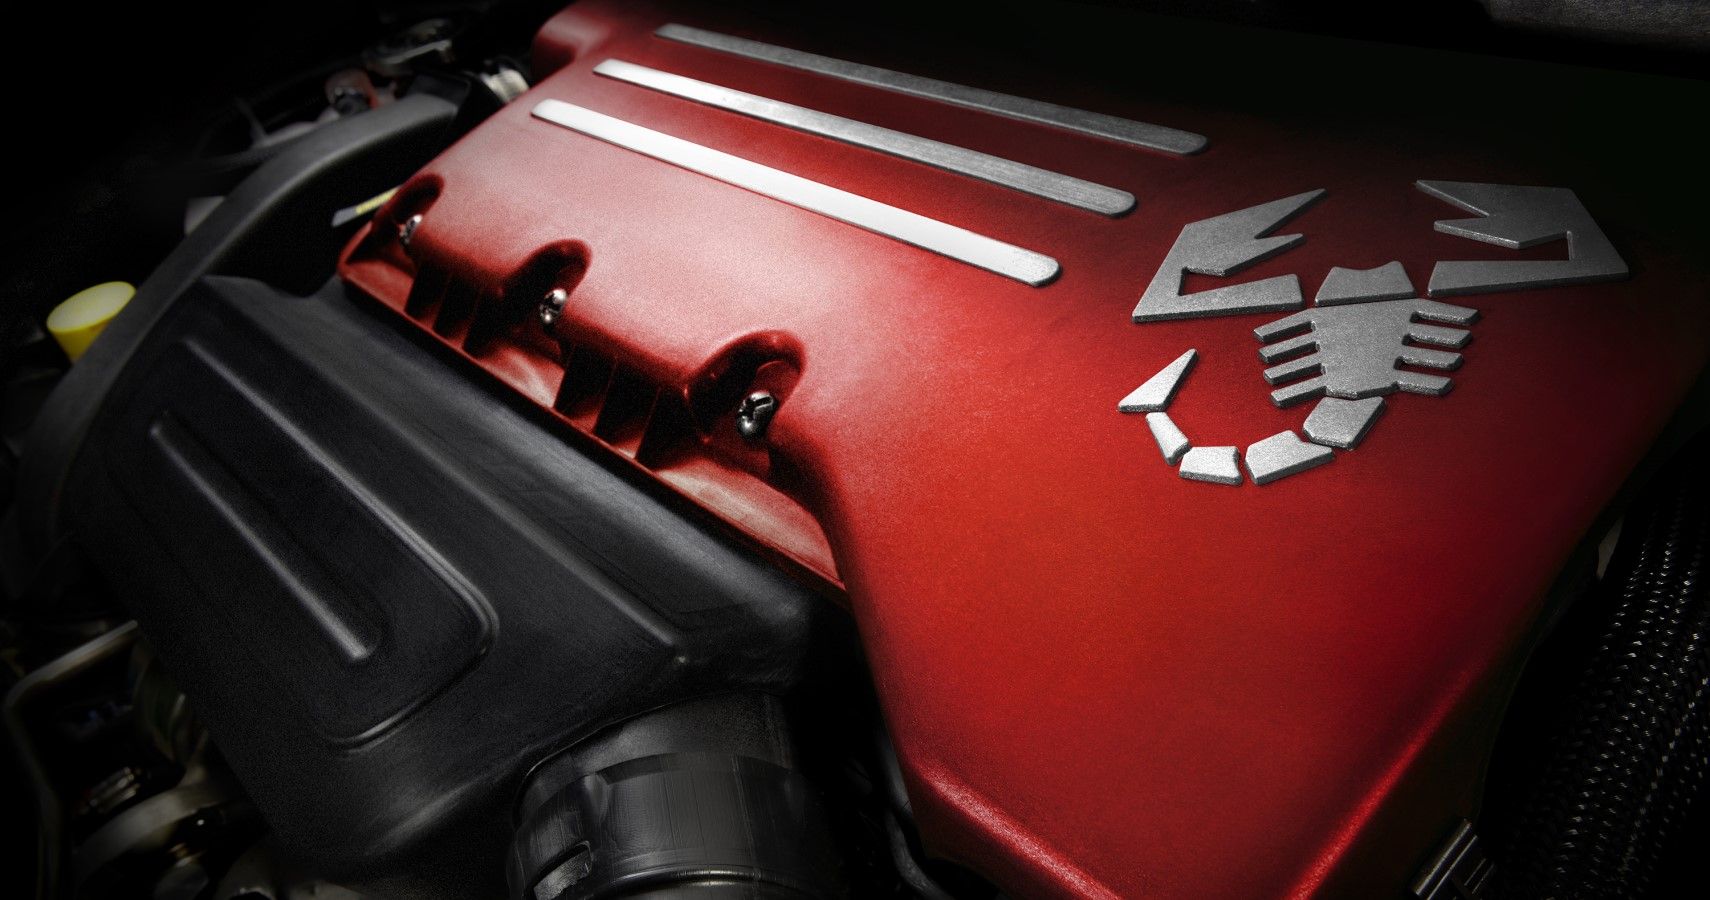 Fiat 500 Abarth engine gets the scorpion's sting as well